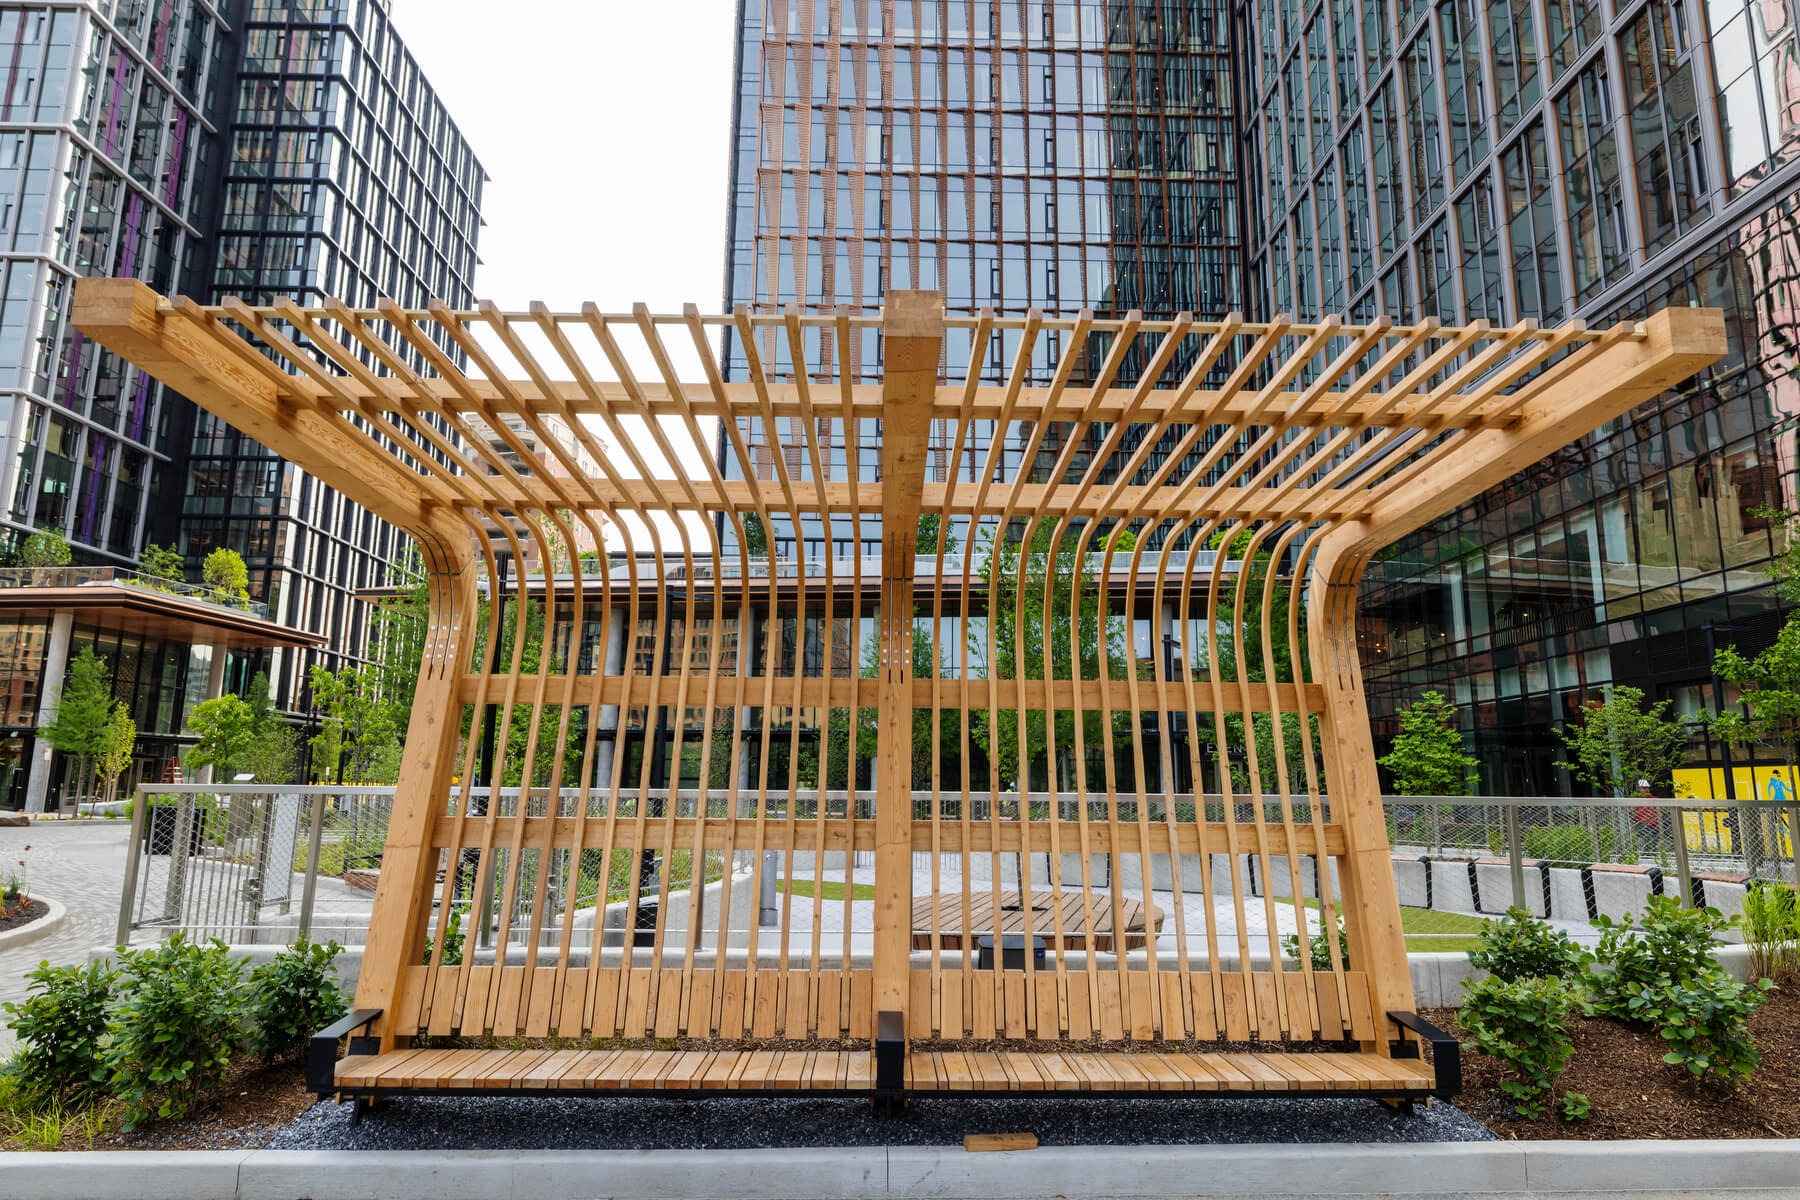 An image of a bus stop with an elaborate wooden covering and backdrop outside Amazon's second headquarters in arlington virginia